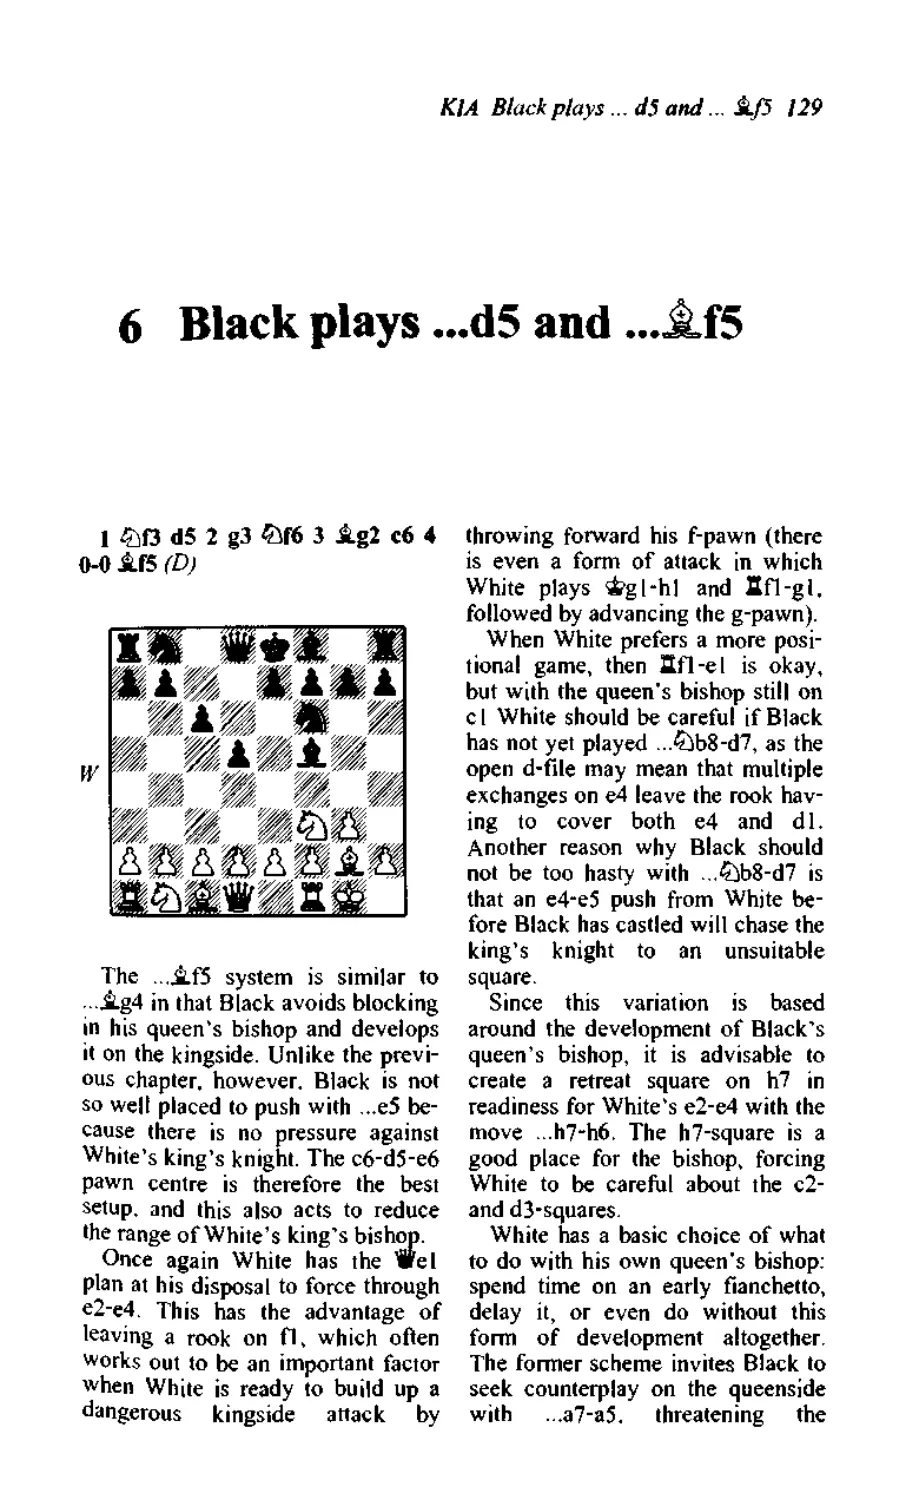 6. Black plays ...d5 and ...Bf5